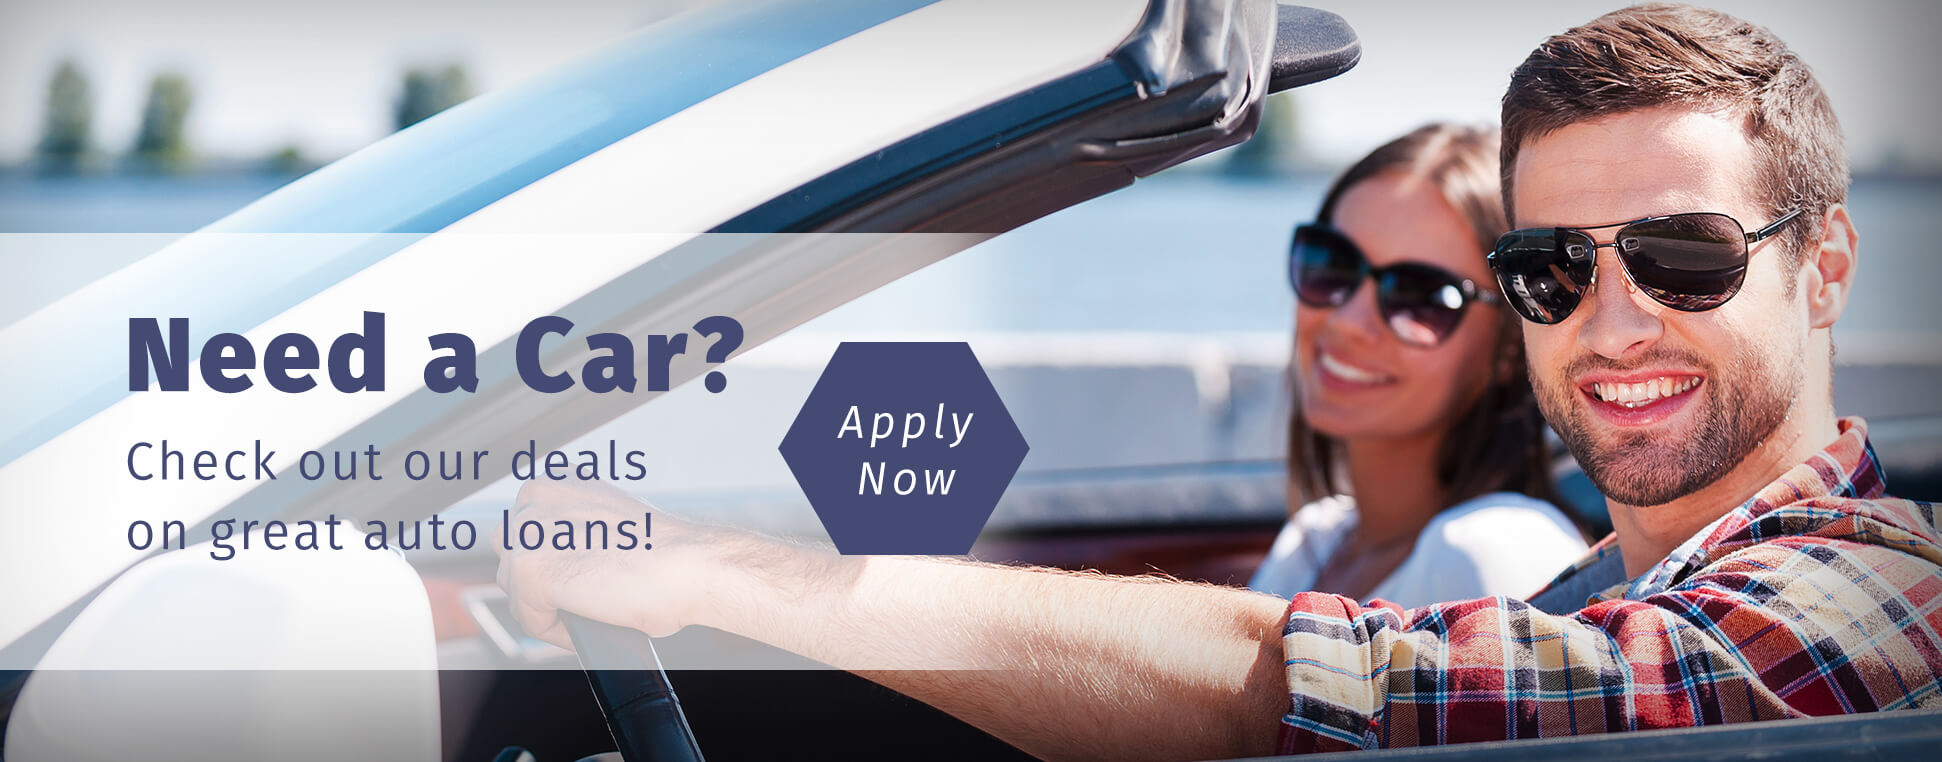 Need a Car? Check out our deals on great auto loans!  Apply Now